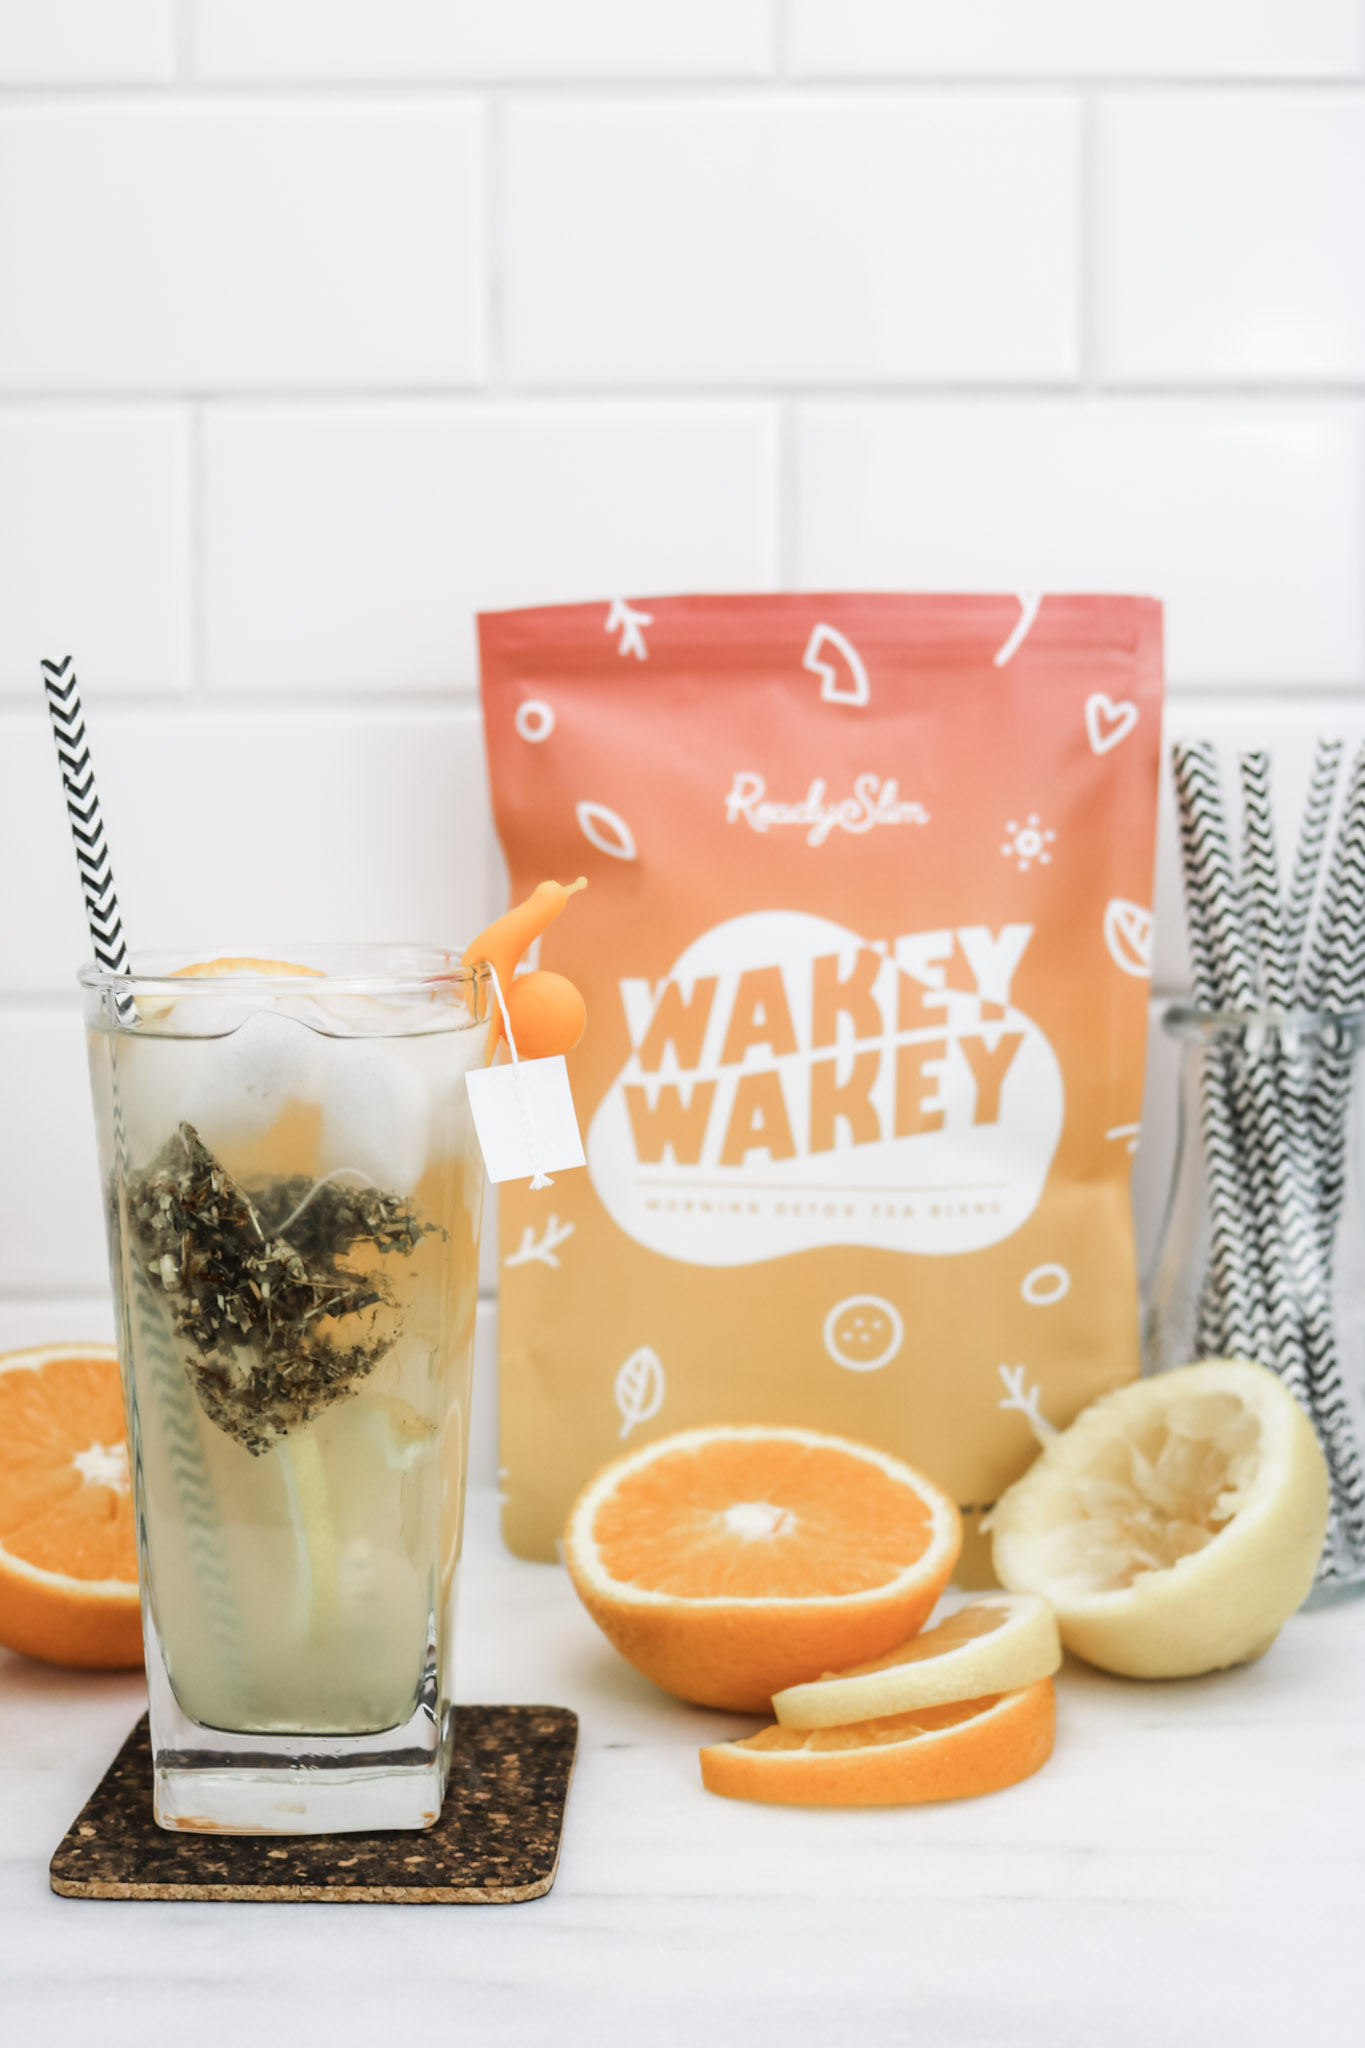 A tall glass of Wakey Wakey tea is shown with ingredients used to make it surrounding it. A bag of Wakey Wakey is behind it. 